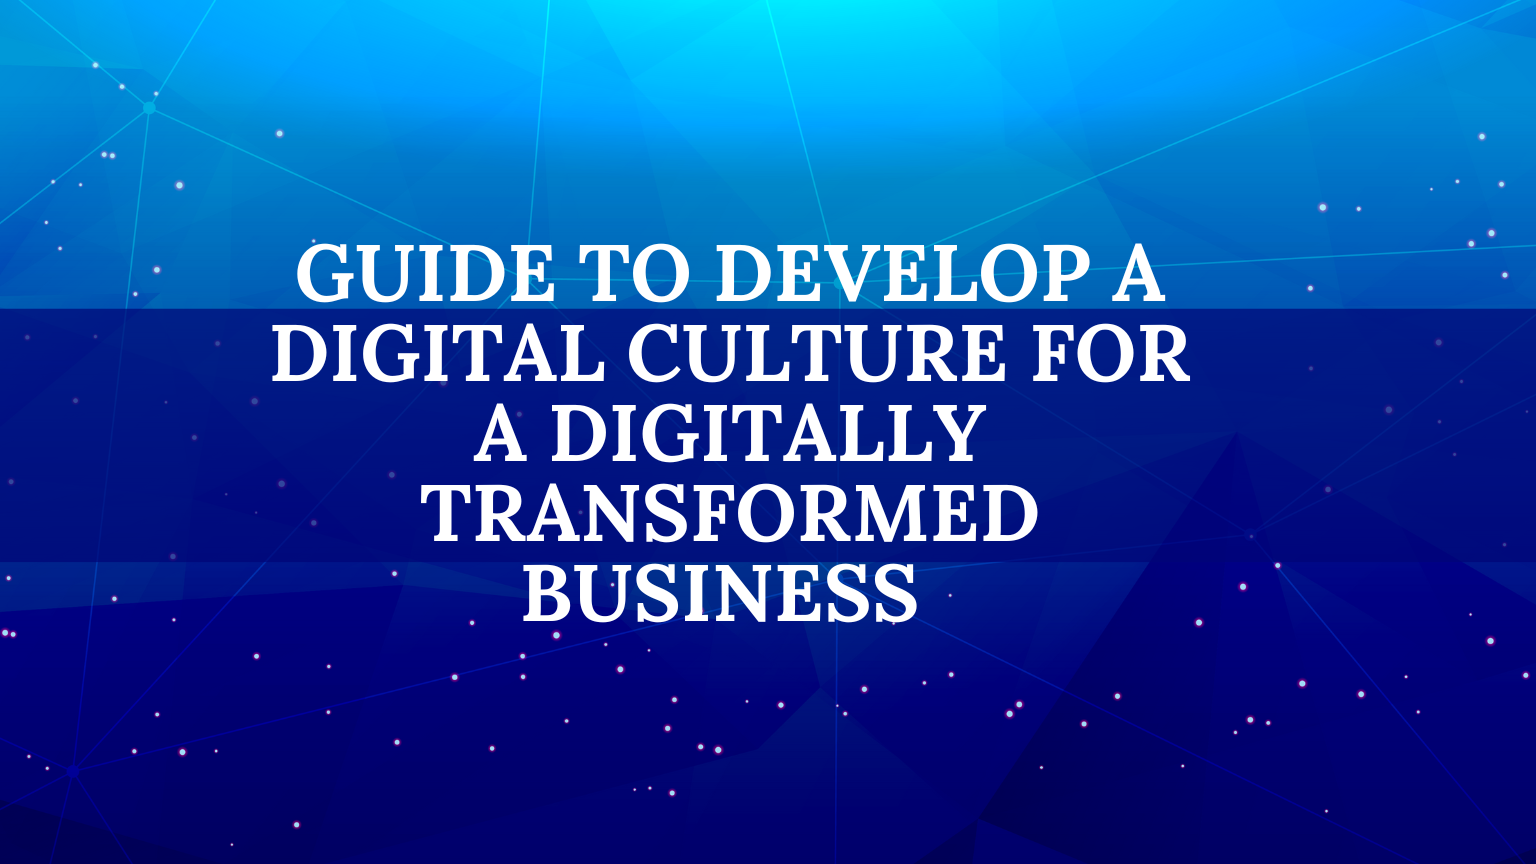 Guide to Develop a Digital Culture for a Digitally Transformed Business